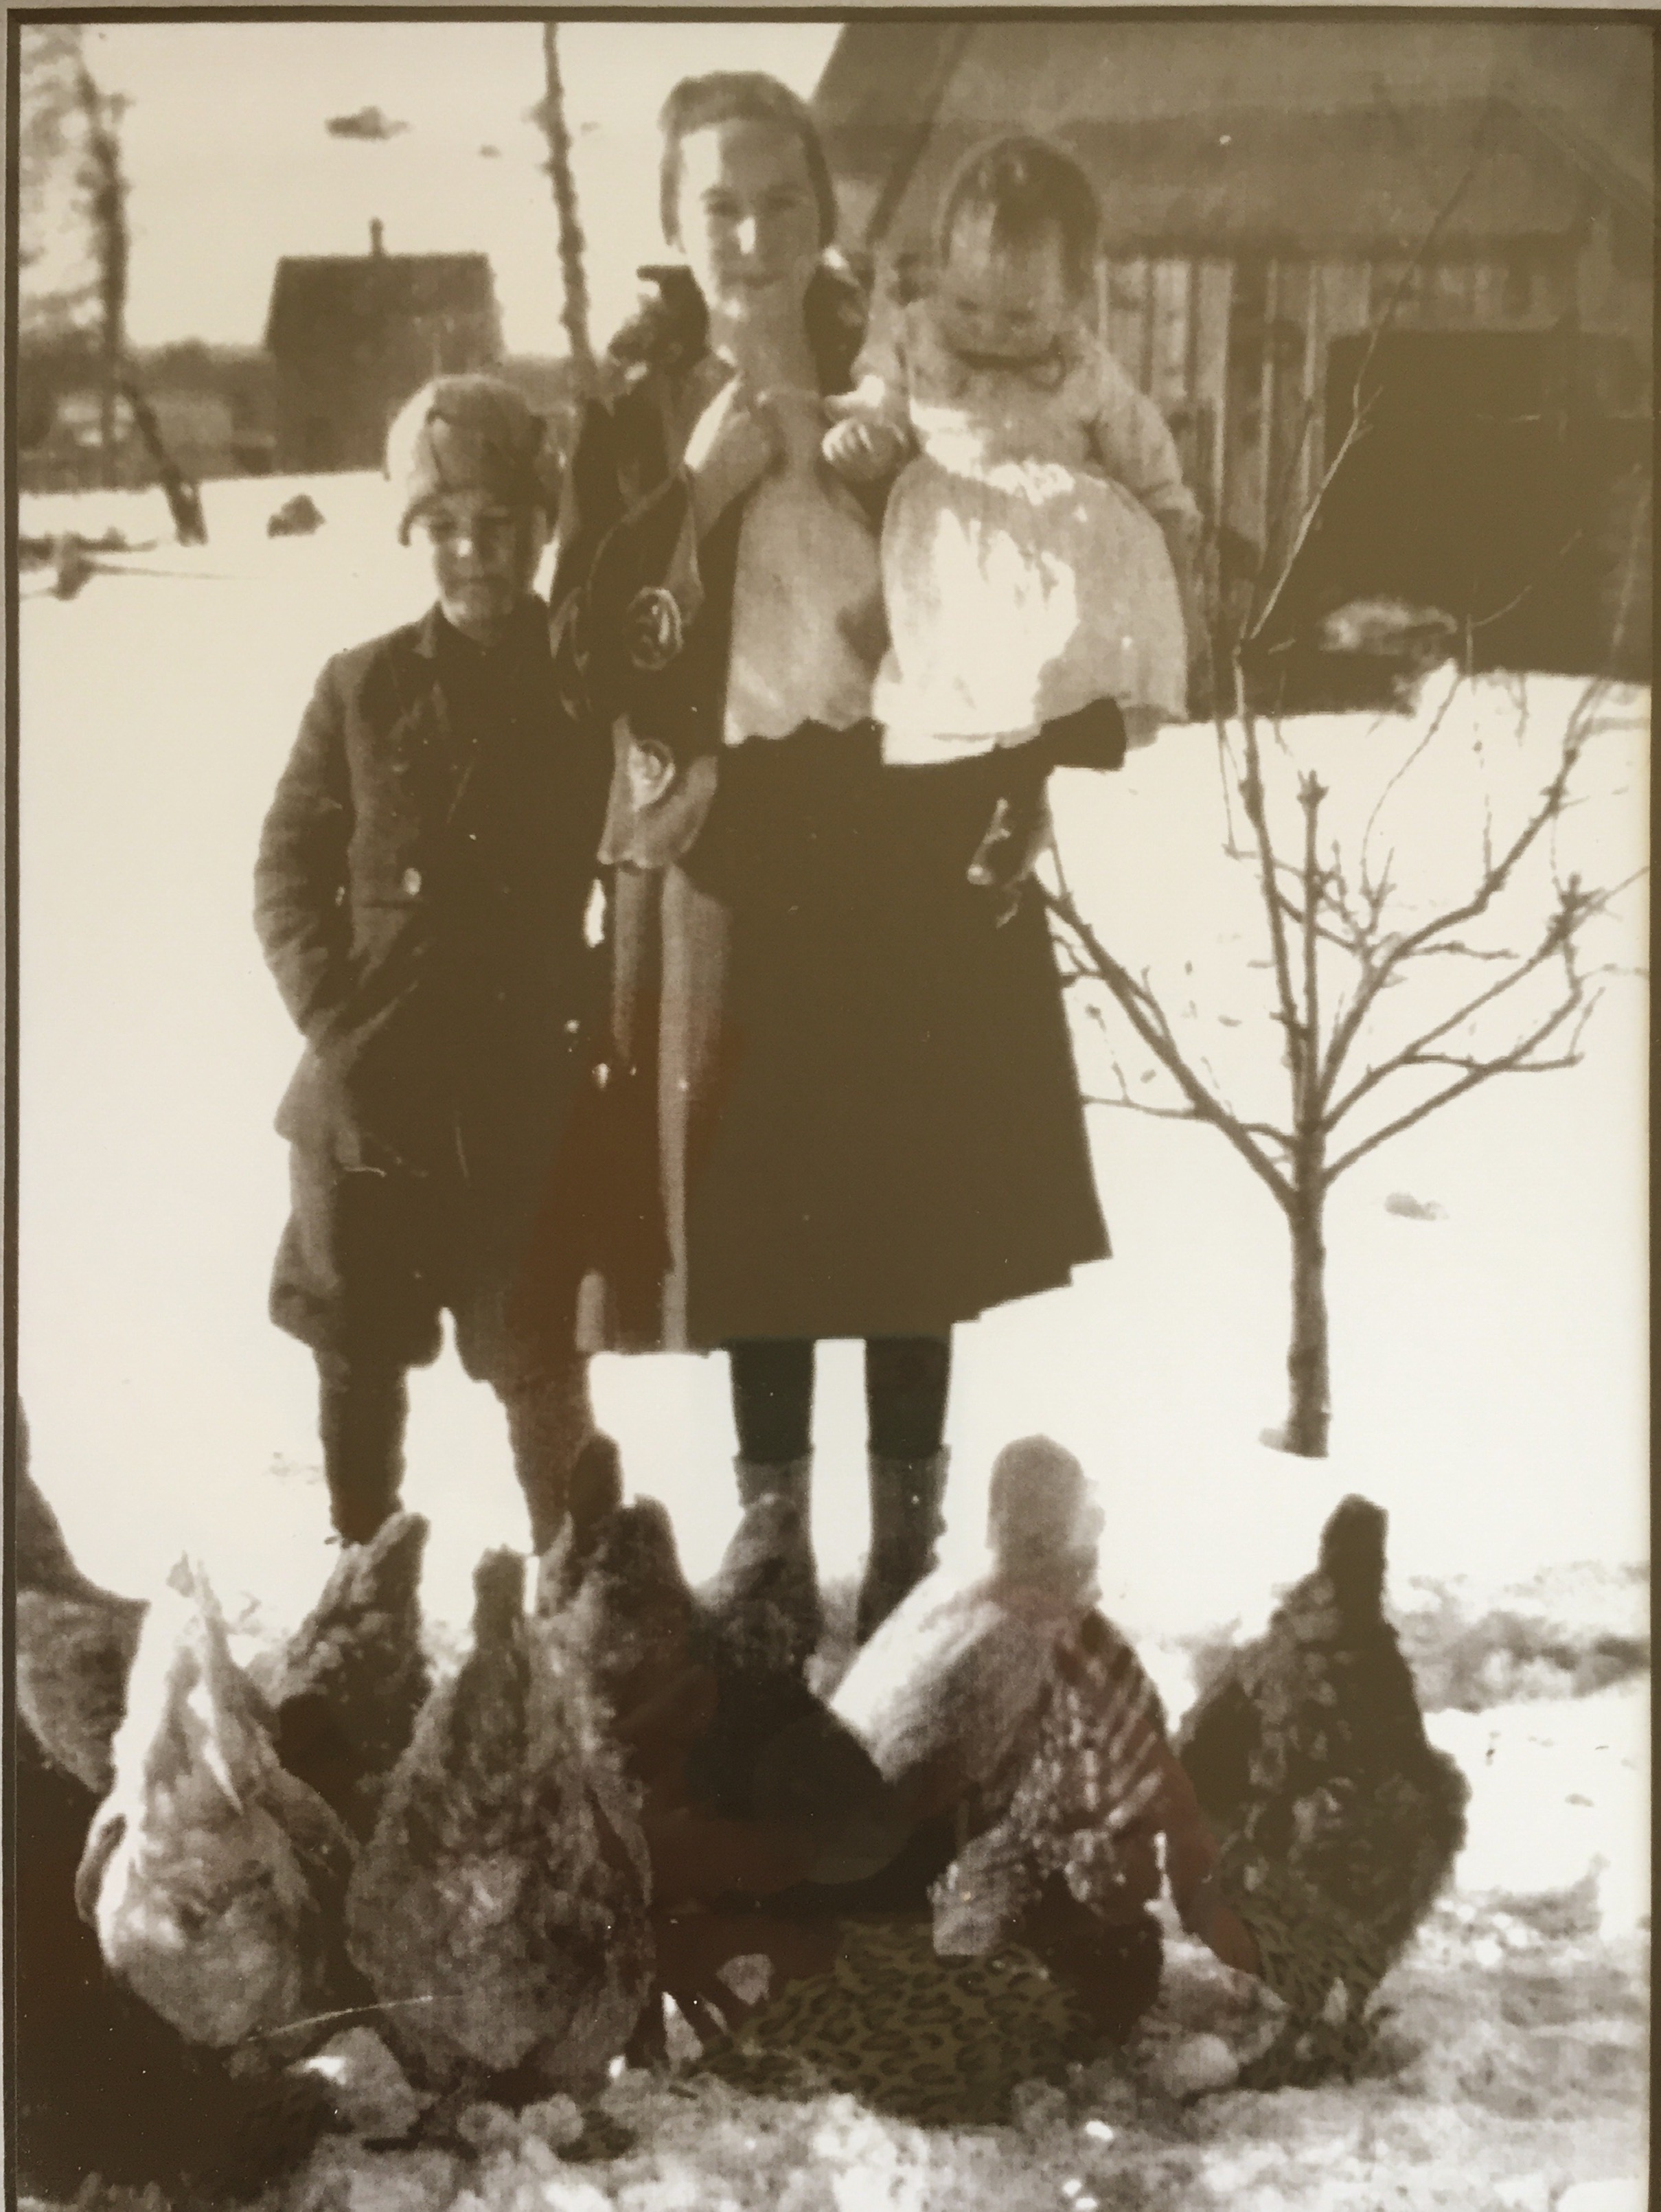 My mom Mary Gallagher (14 yrs old) Uncle Jim (7 yrs) and Aunt Ann (5-6 mos) in Sydney Mines Nova Scotia Canada 1921